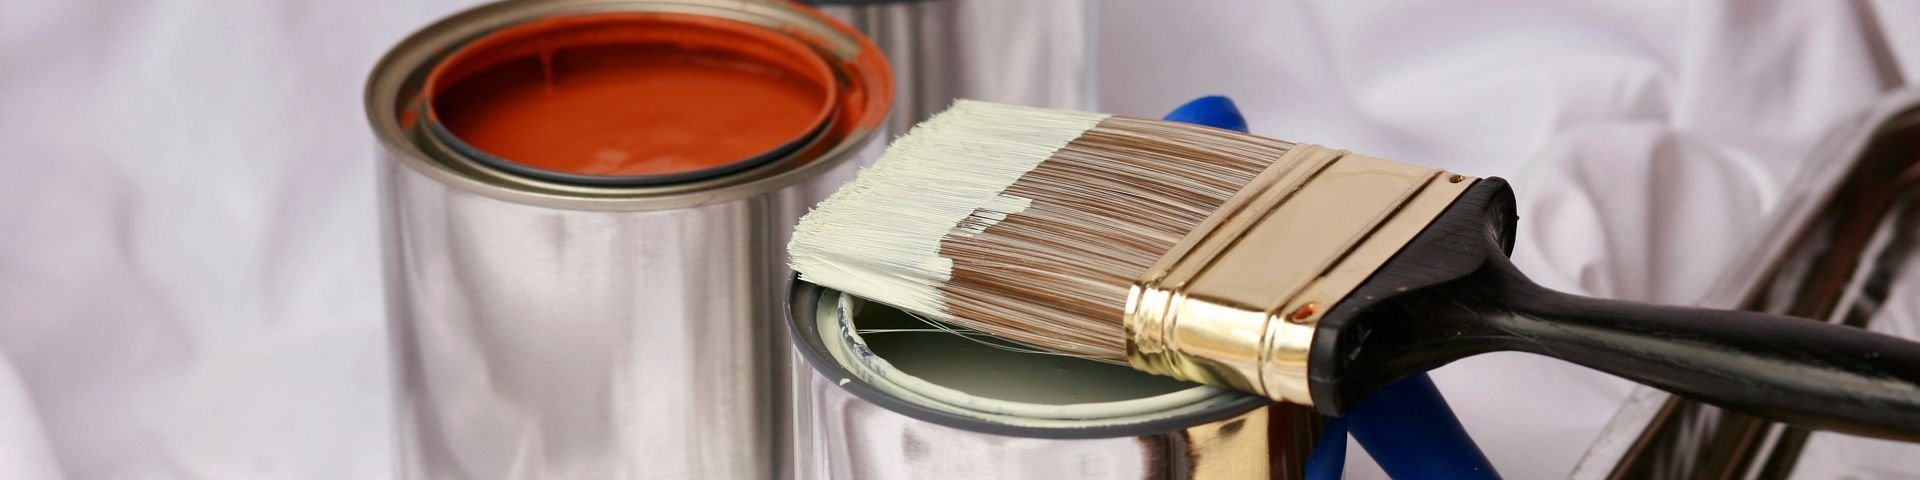 Quality paint and stain products at Shelbyville Paints